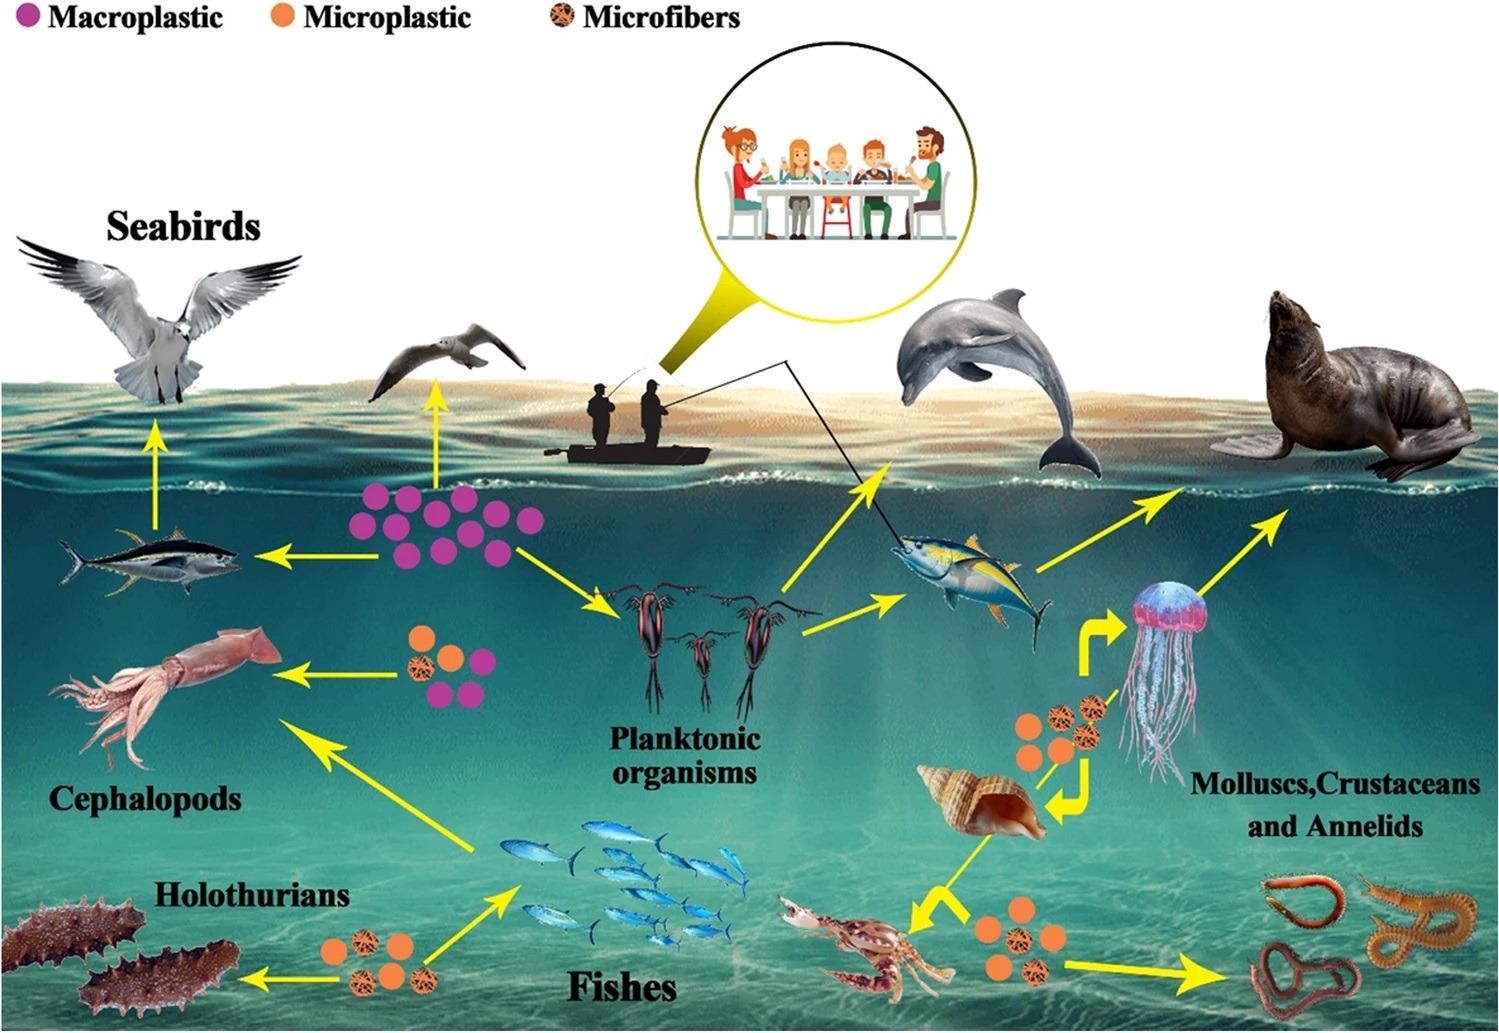 The path of macroplastics and MFs entering the food chain.